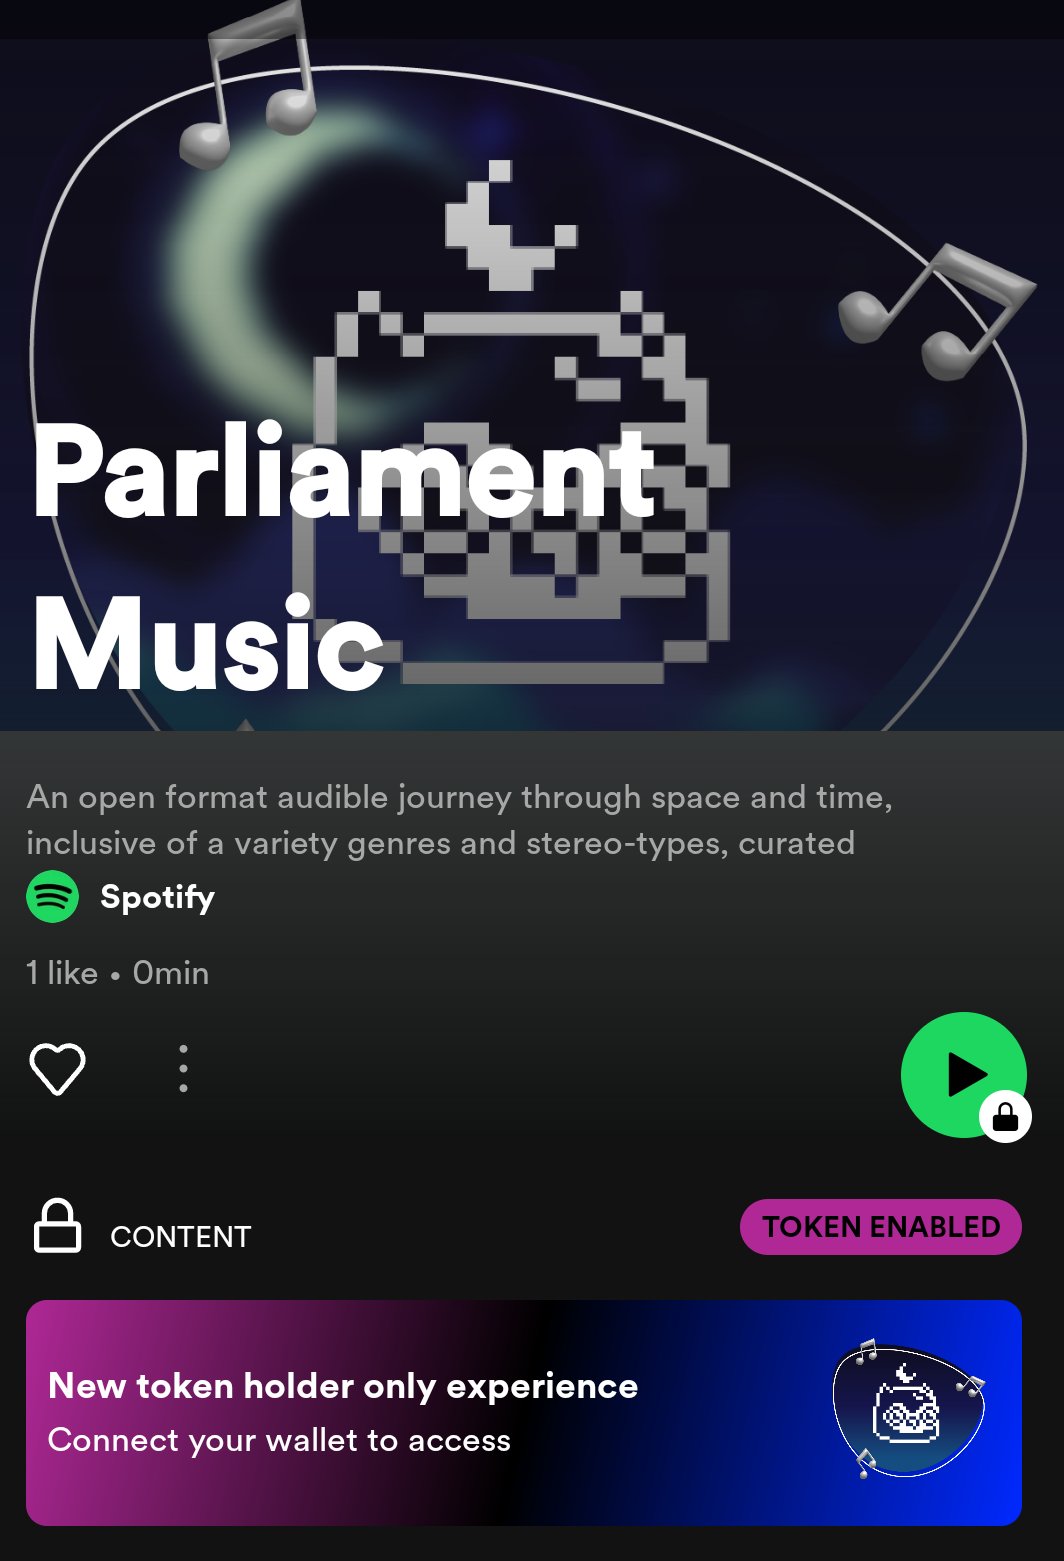 1/ It’s official! Moonbirds has been selected to partner with @Spotify for their exclusive pilot bringing token-enabled ...